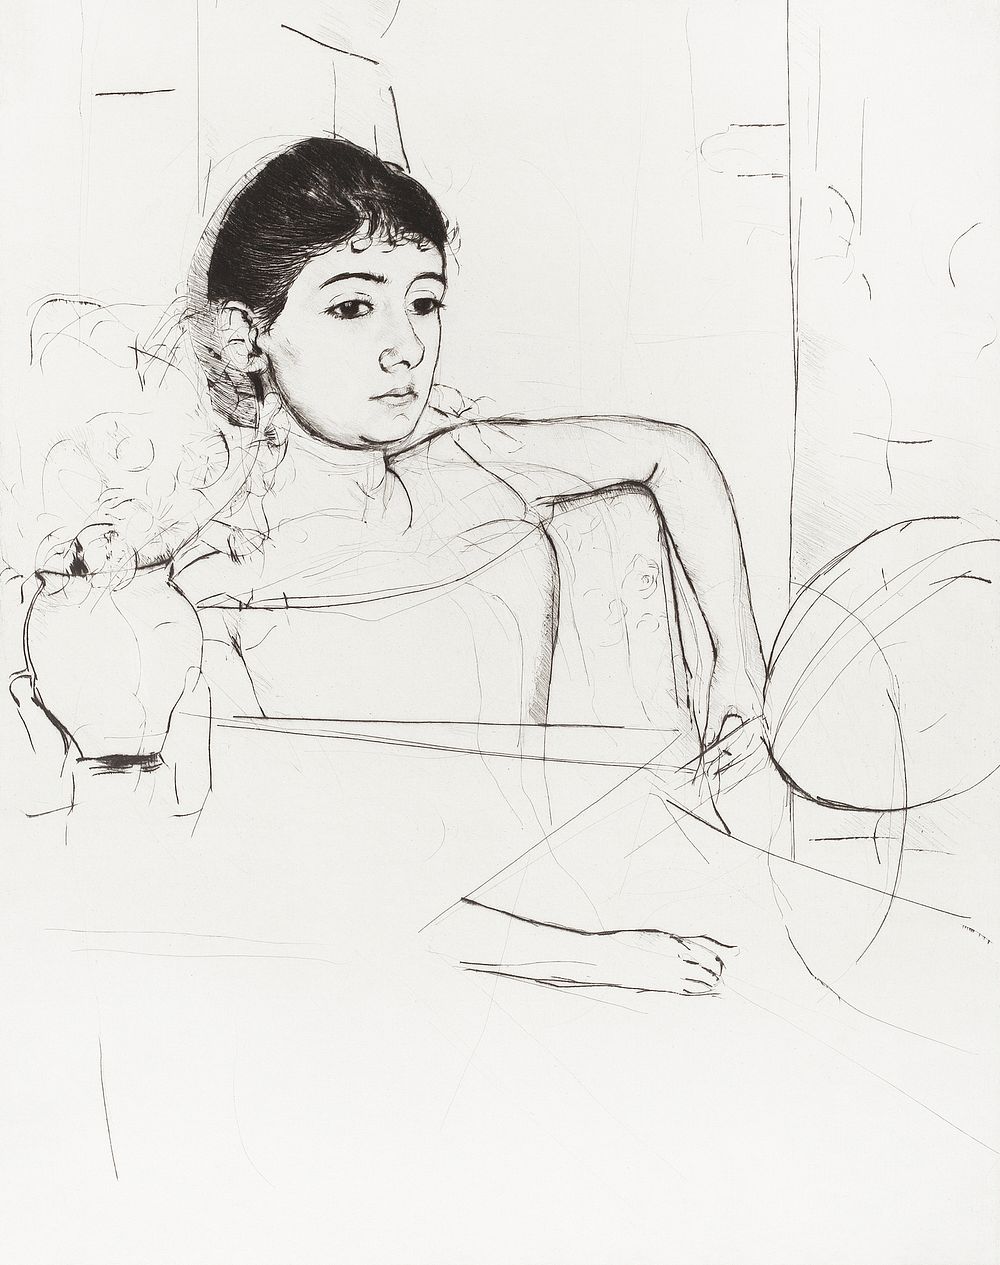 Mimi as a Brunette(1889) by Mary Cassatt. Original portrait drawing from The National Gallery of Art. Digitally enhanced by…